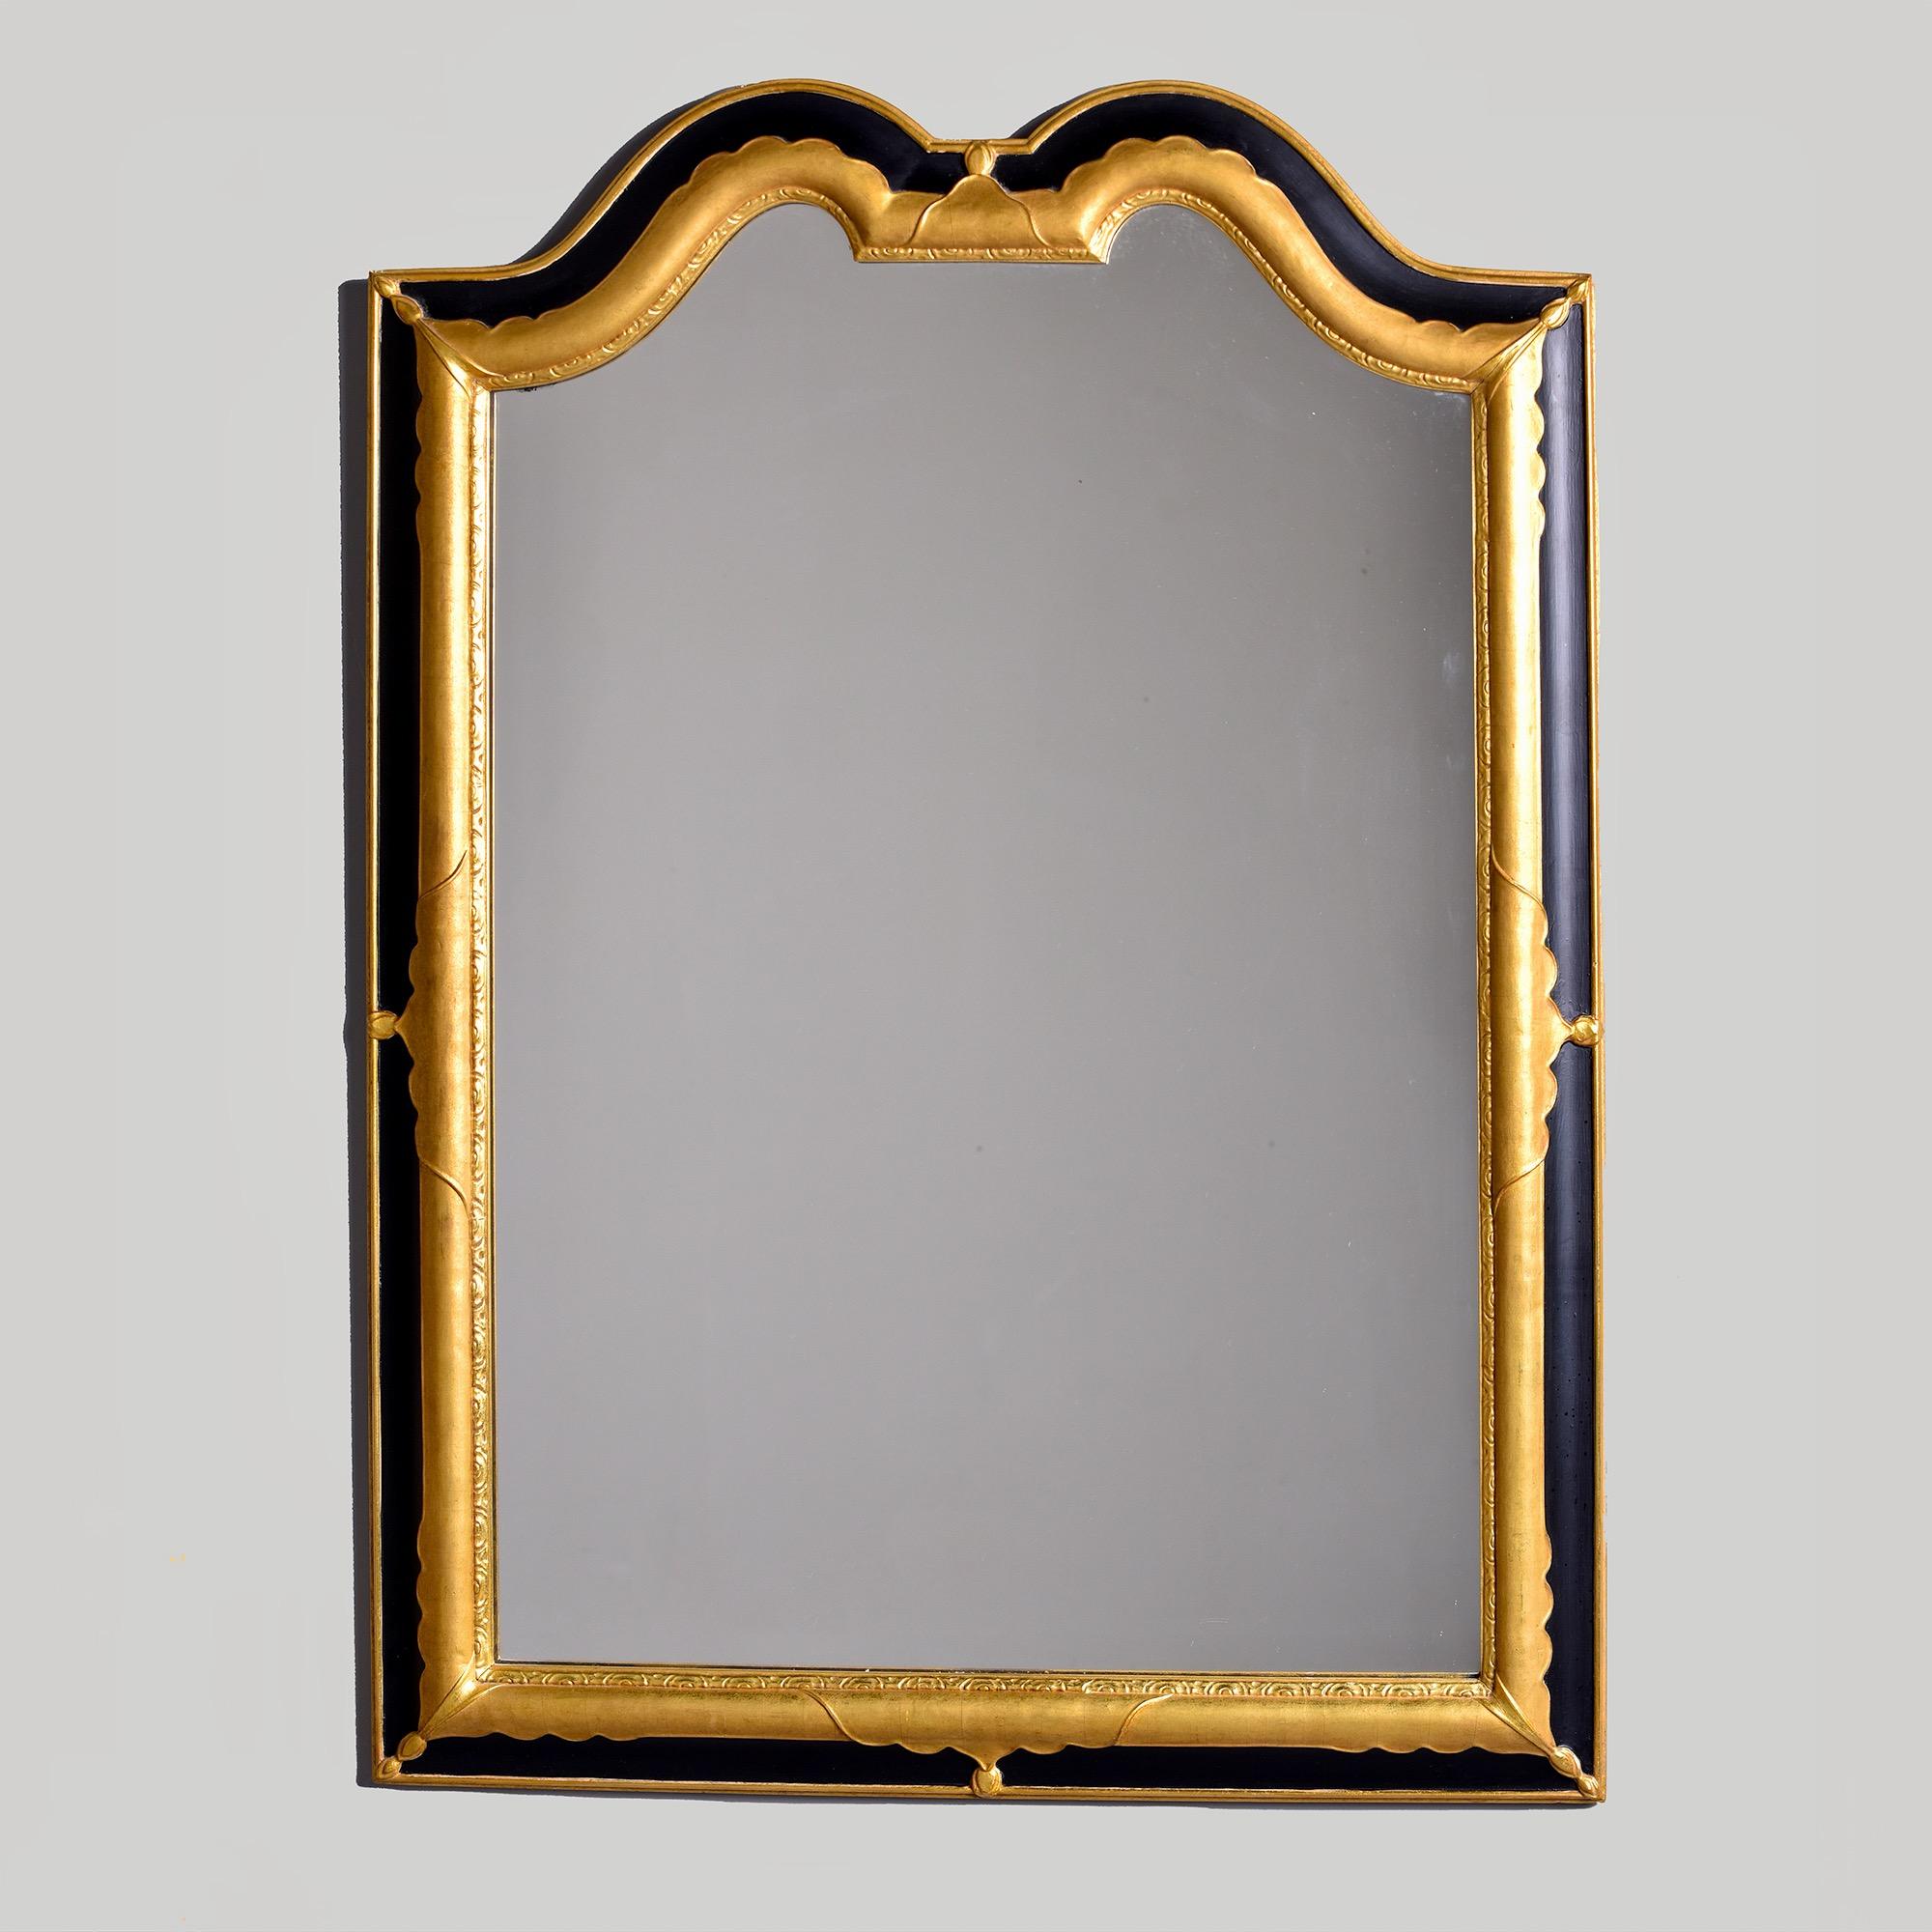 Found in the US, this circa 1950s black and gilt frame French / Hollywood Regency style mirror by D. Milch and Sons features a double curved top and swag design. 

Very good vintage condition. 